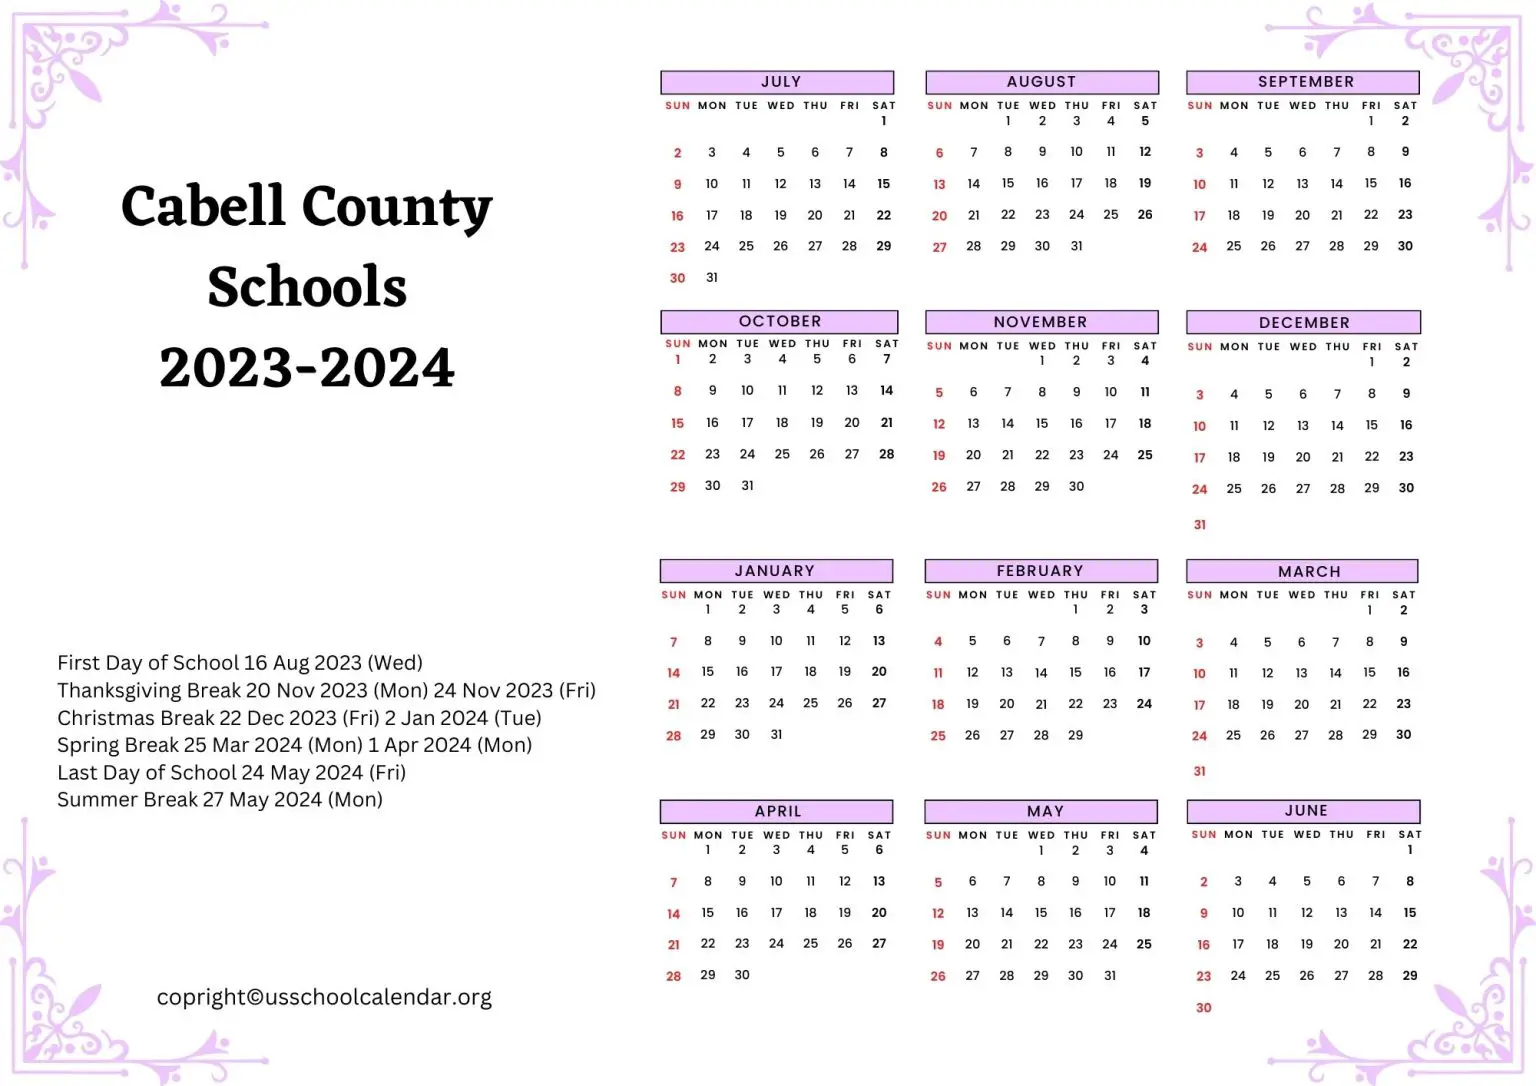 Cabell County Schools Calendar with Holidays 2023-2024